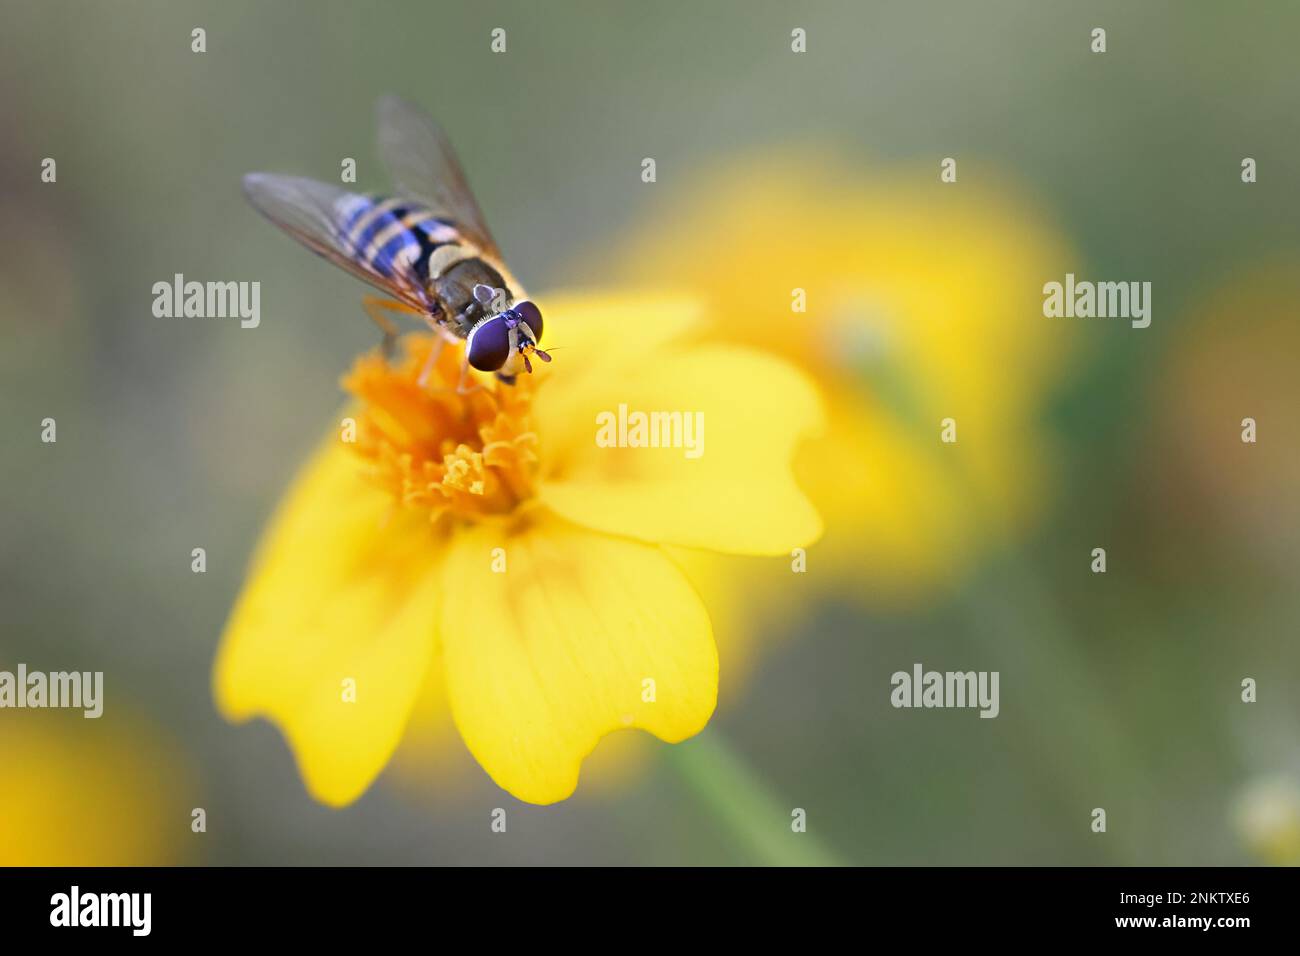 Hover fly, also called flower fly or syrphid fly, feeding on a flower Stock Photo